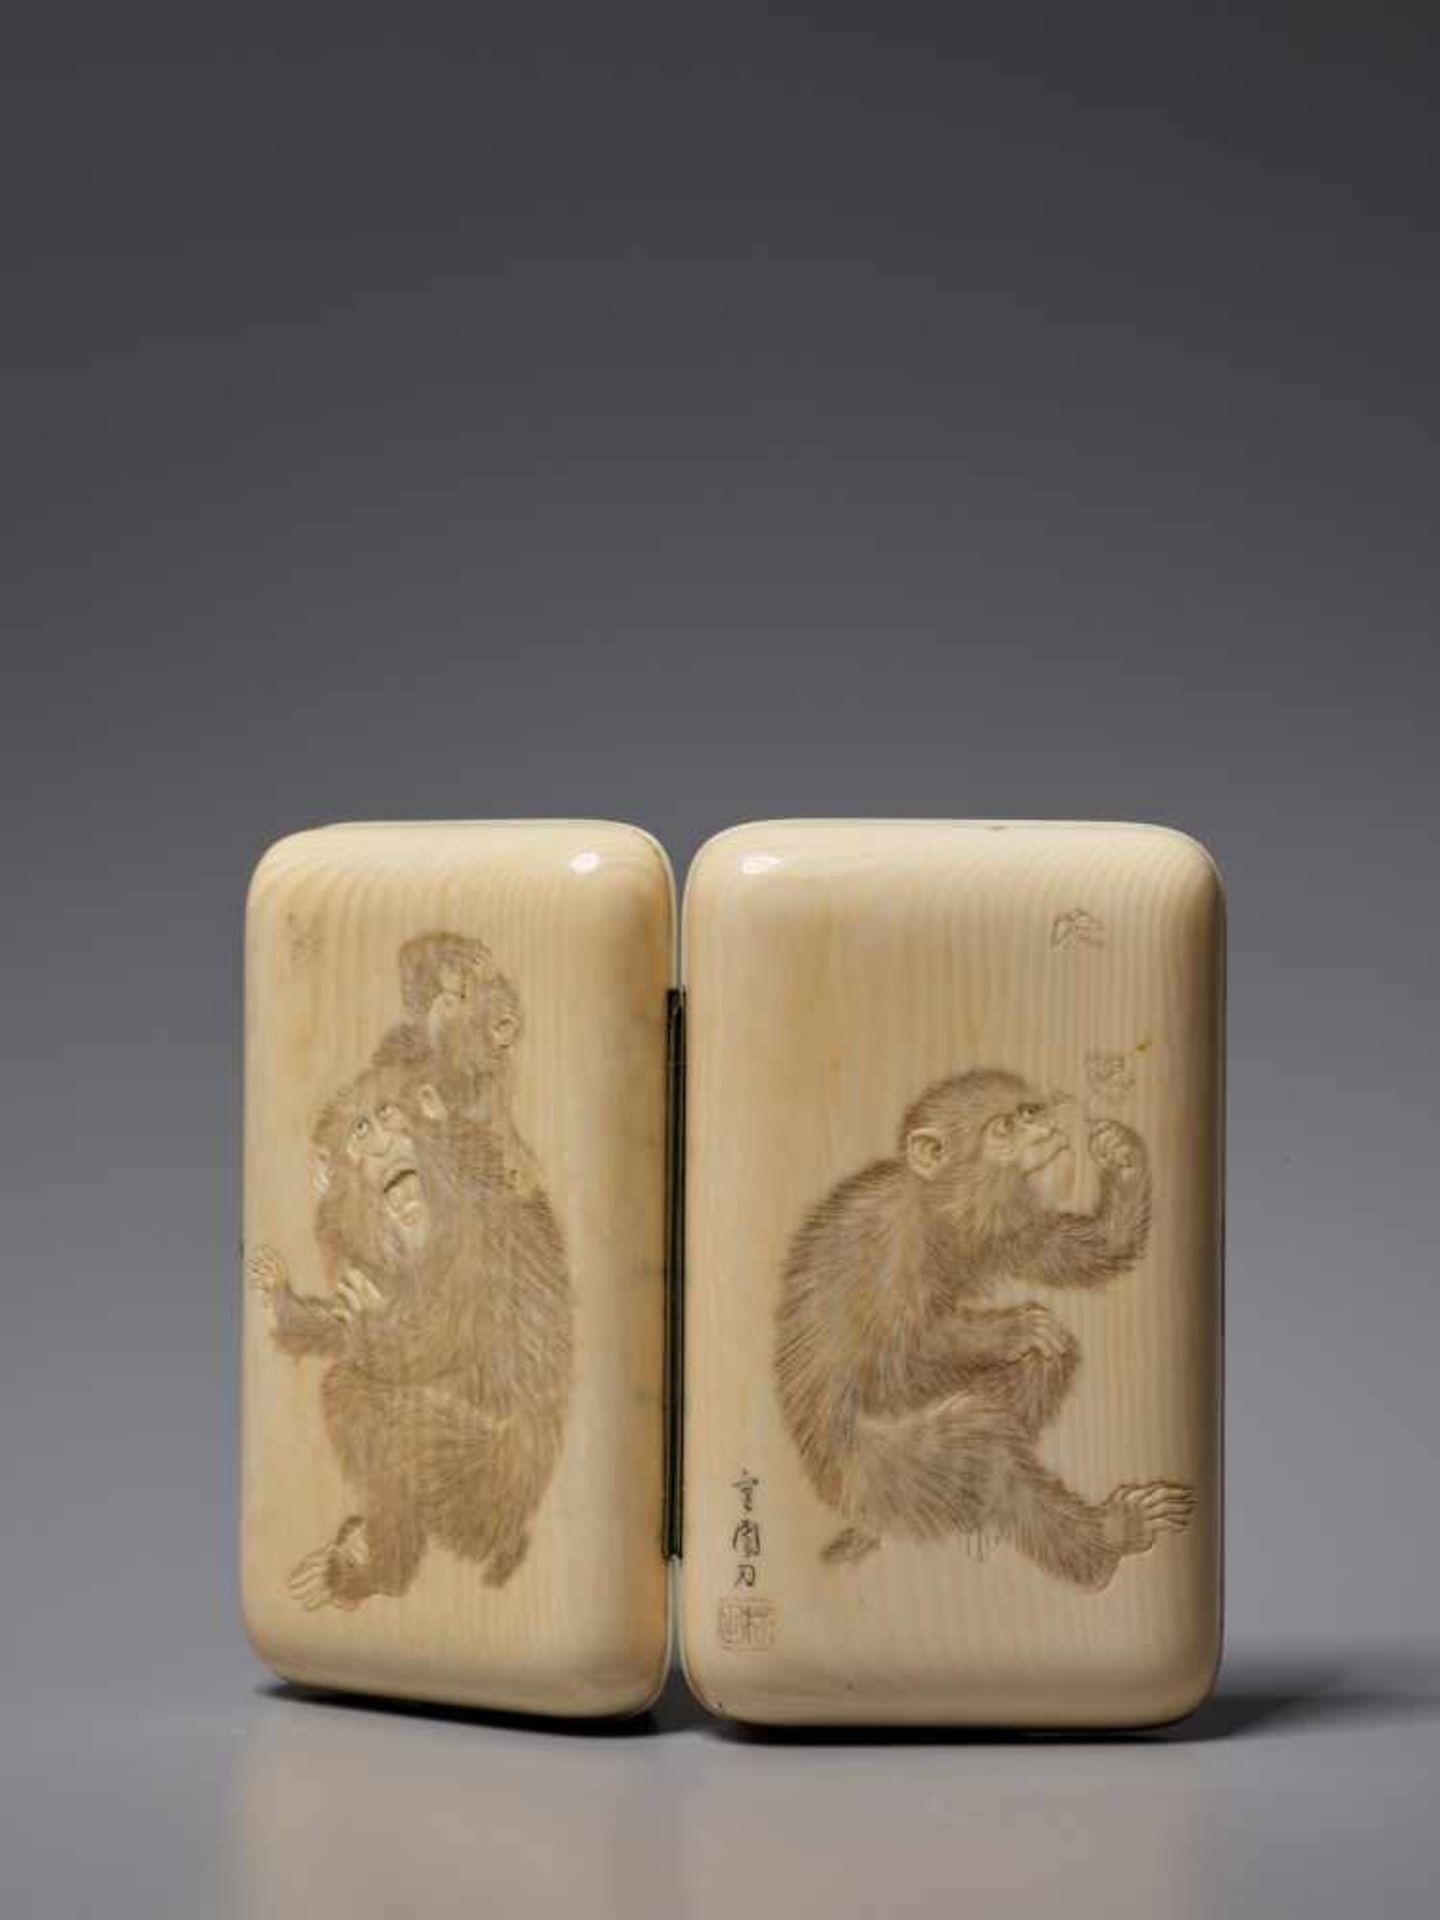 A FINE JAPANESE IVORY CIGARETTE CASE WITH MONKEYS IvoryJapan, Meiji period (1868 - 1912)A - Image 8 of 8